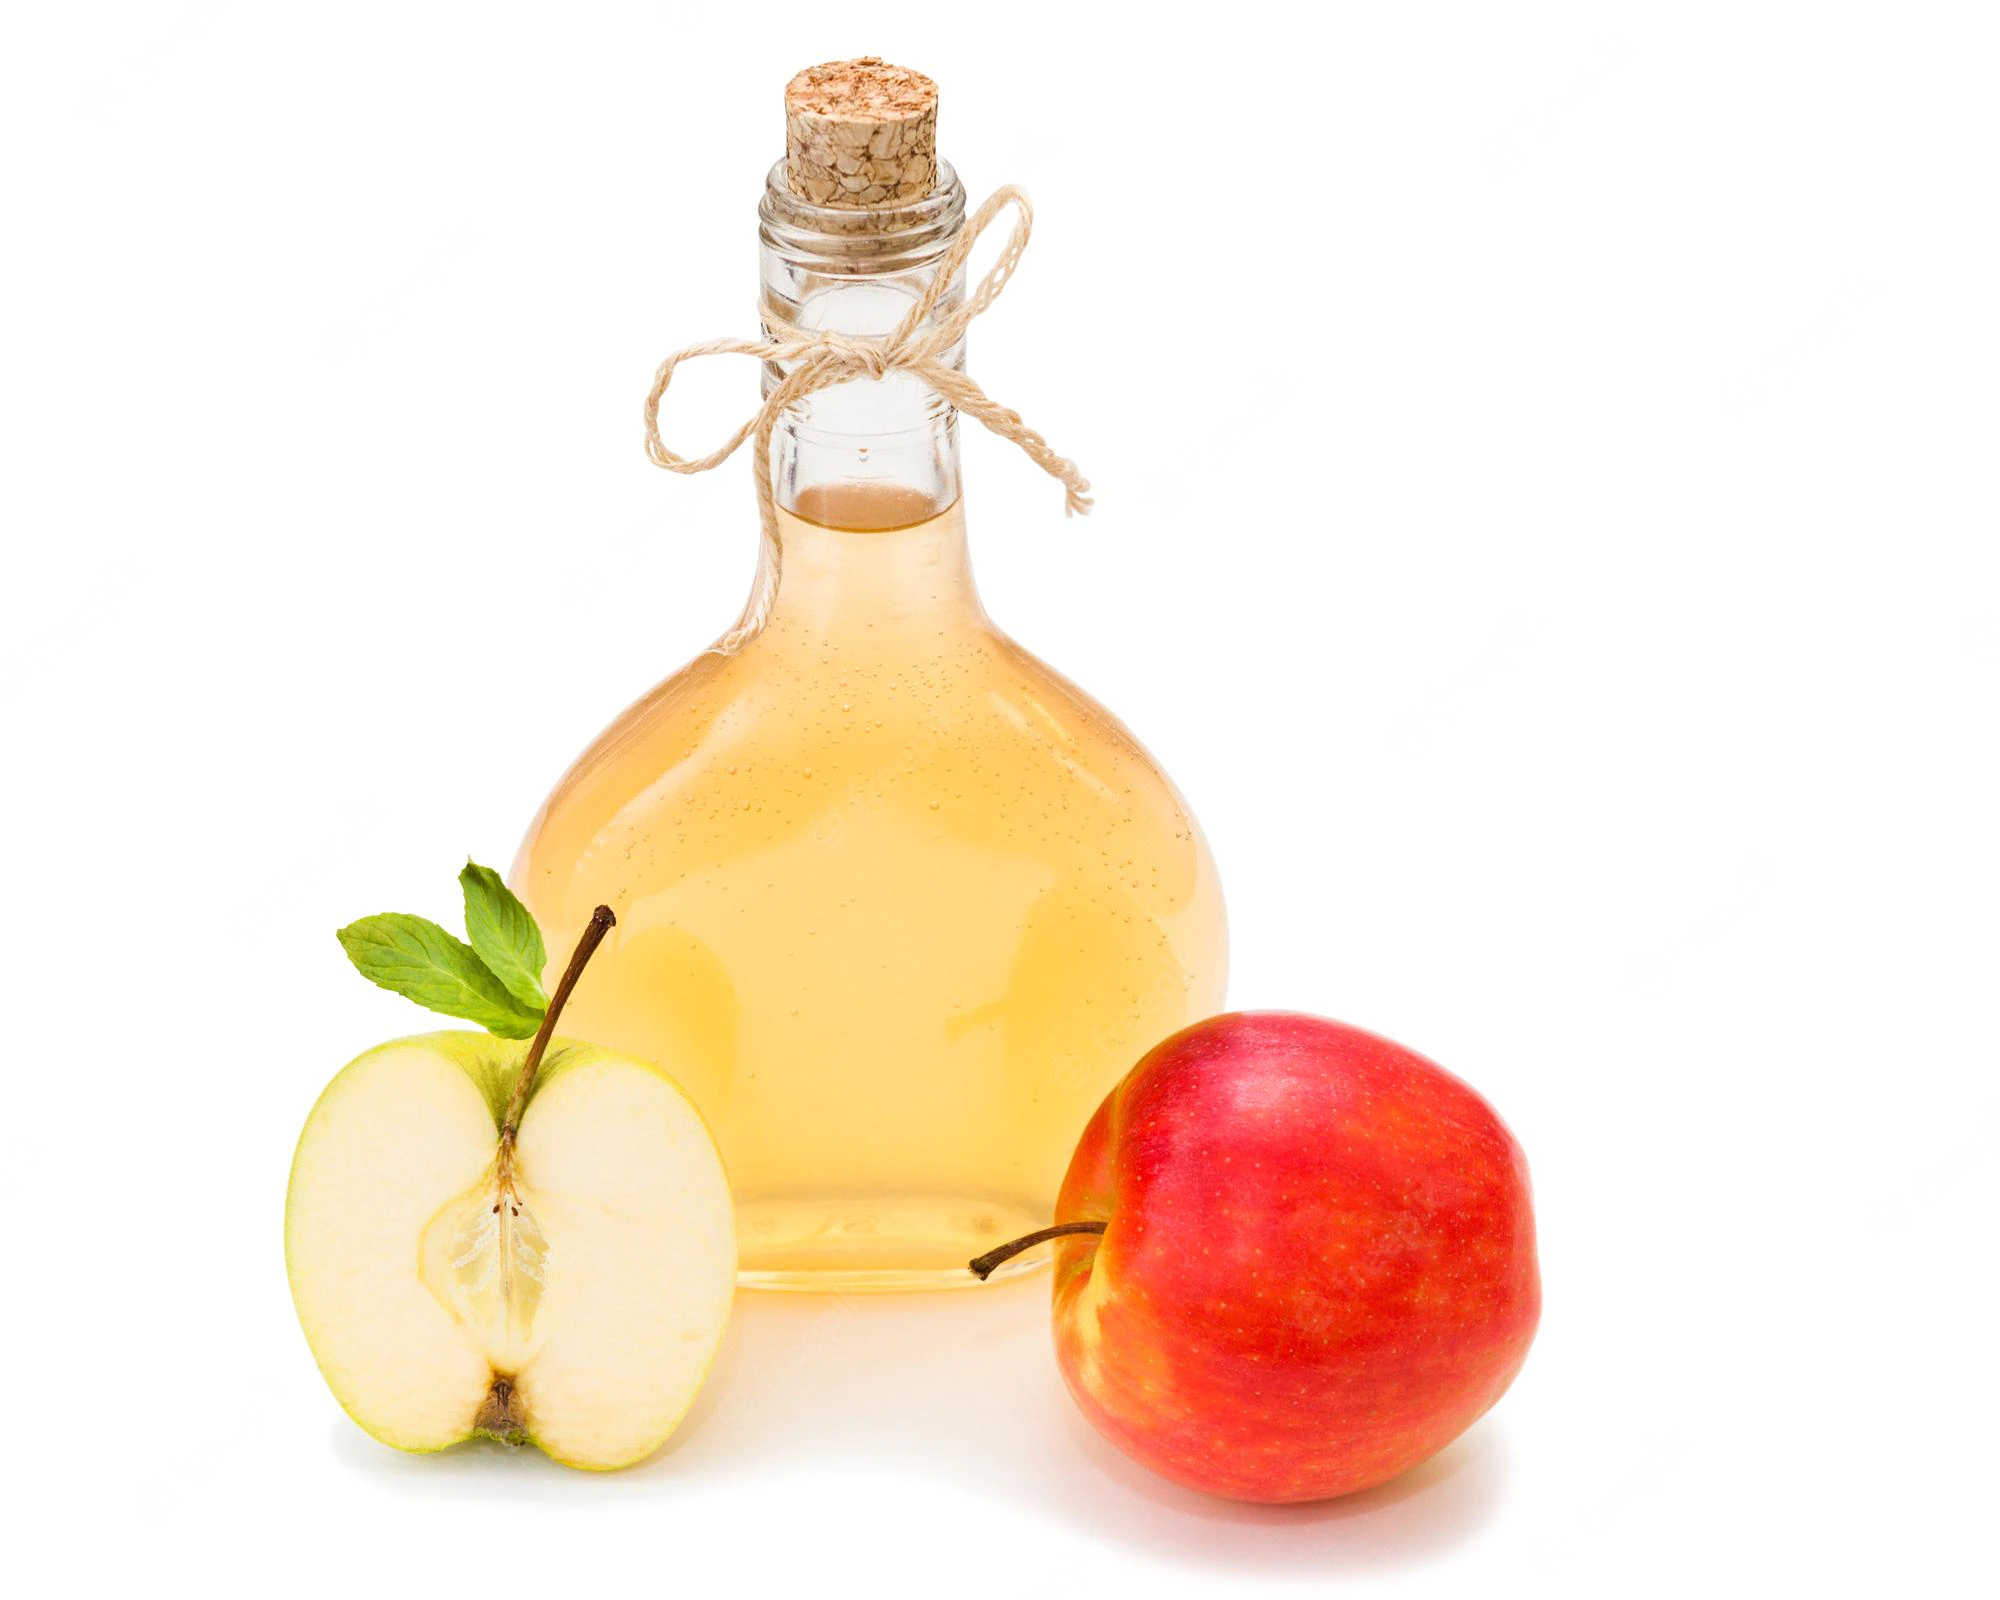 homemade fermented apple vinegar clear bottle with red green apples healthy dietary food 636670 248